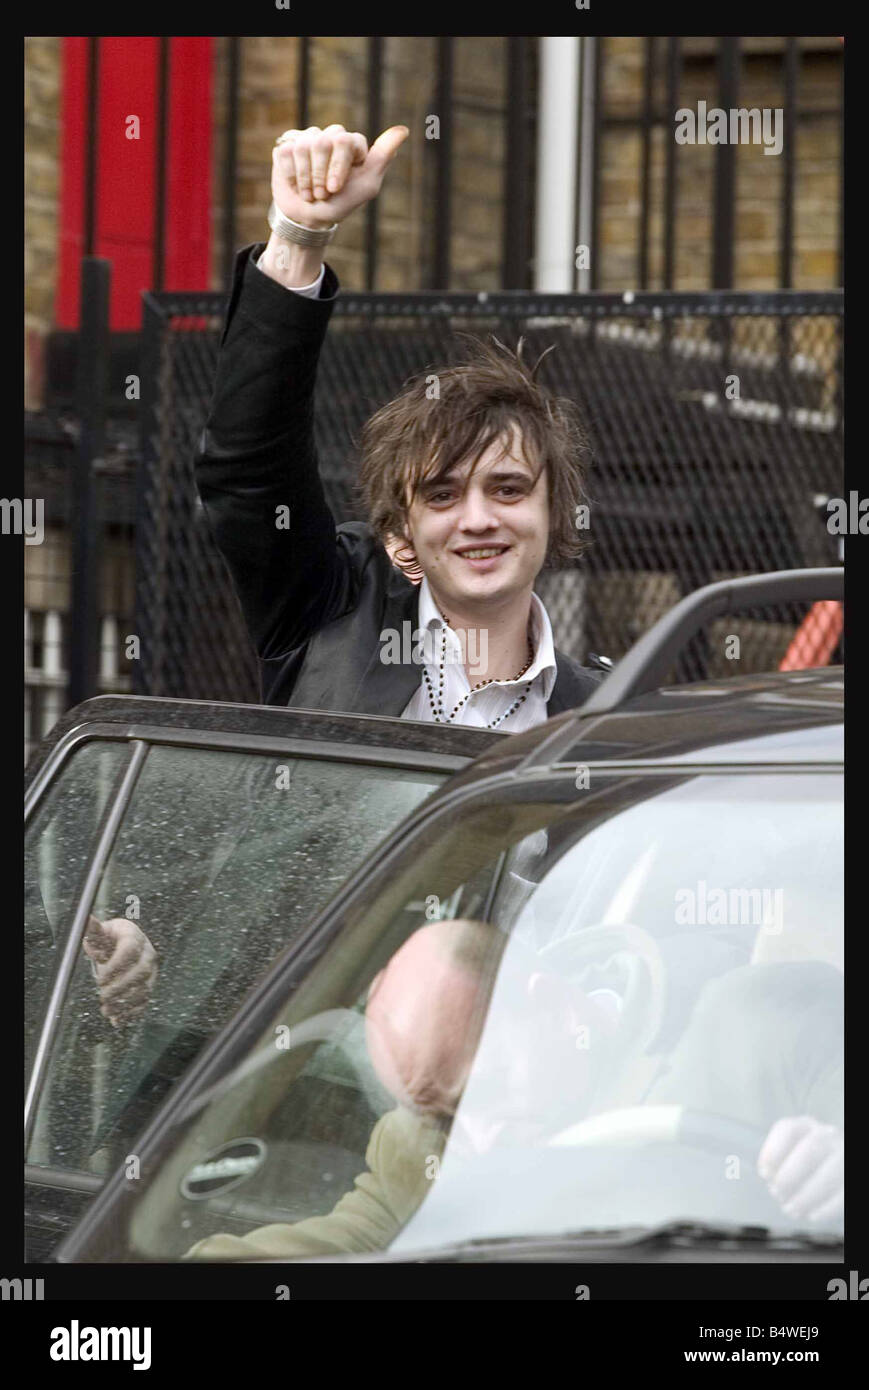 Babyshambles singer Pete Doherty has been given a 12 month community order after admitting possession of drugs The 26 year old was sentenced at Ealing Magistrates Court February 2006 Stock Photo